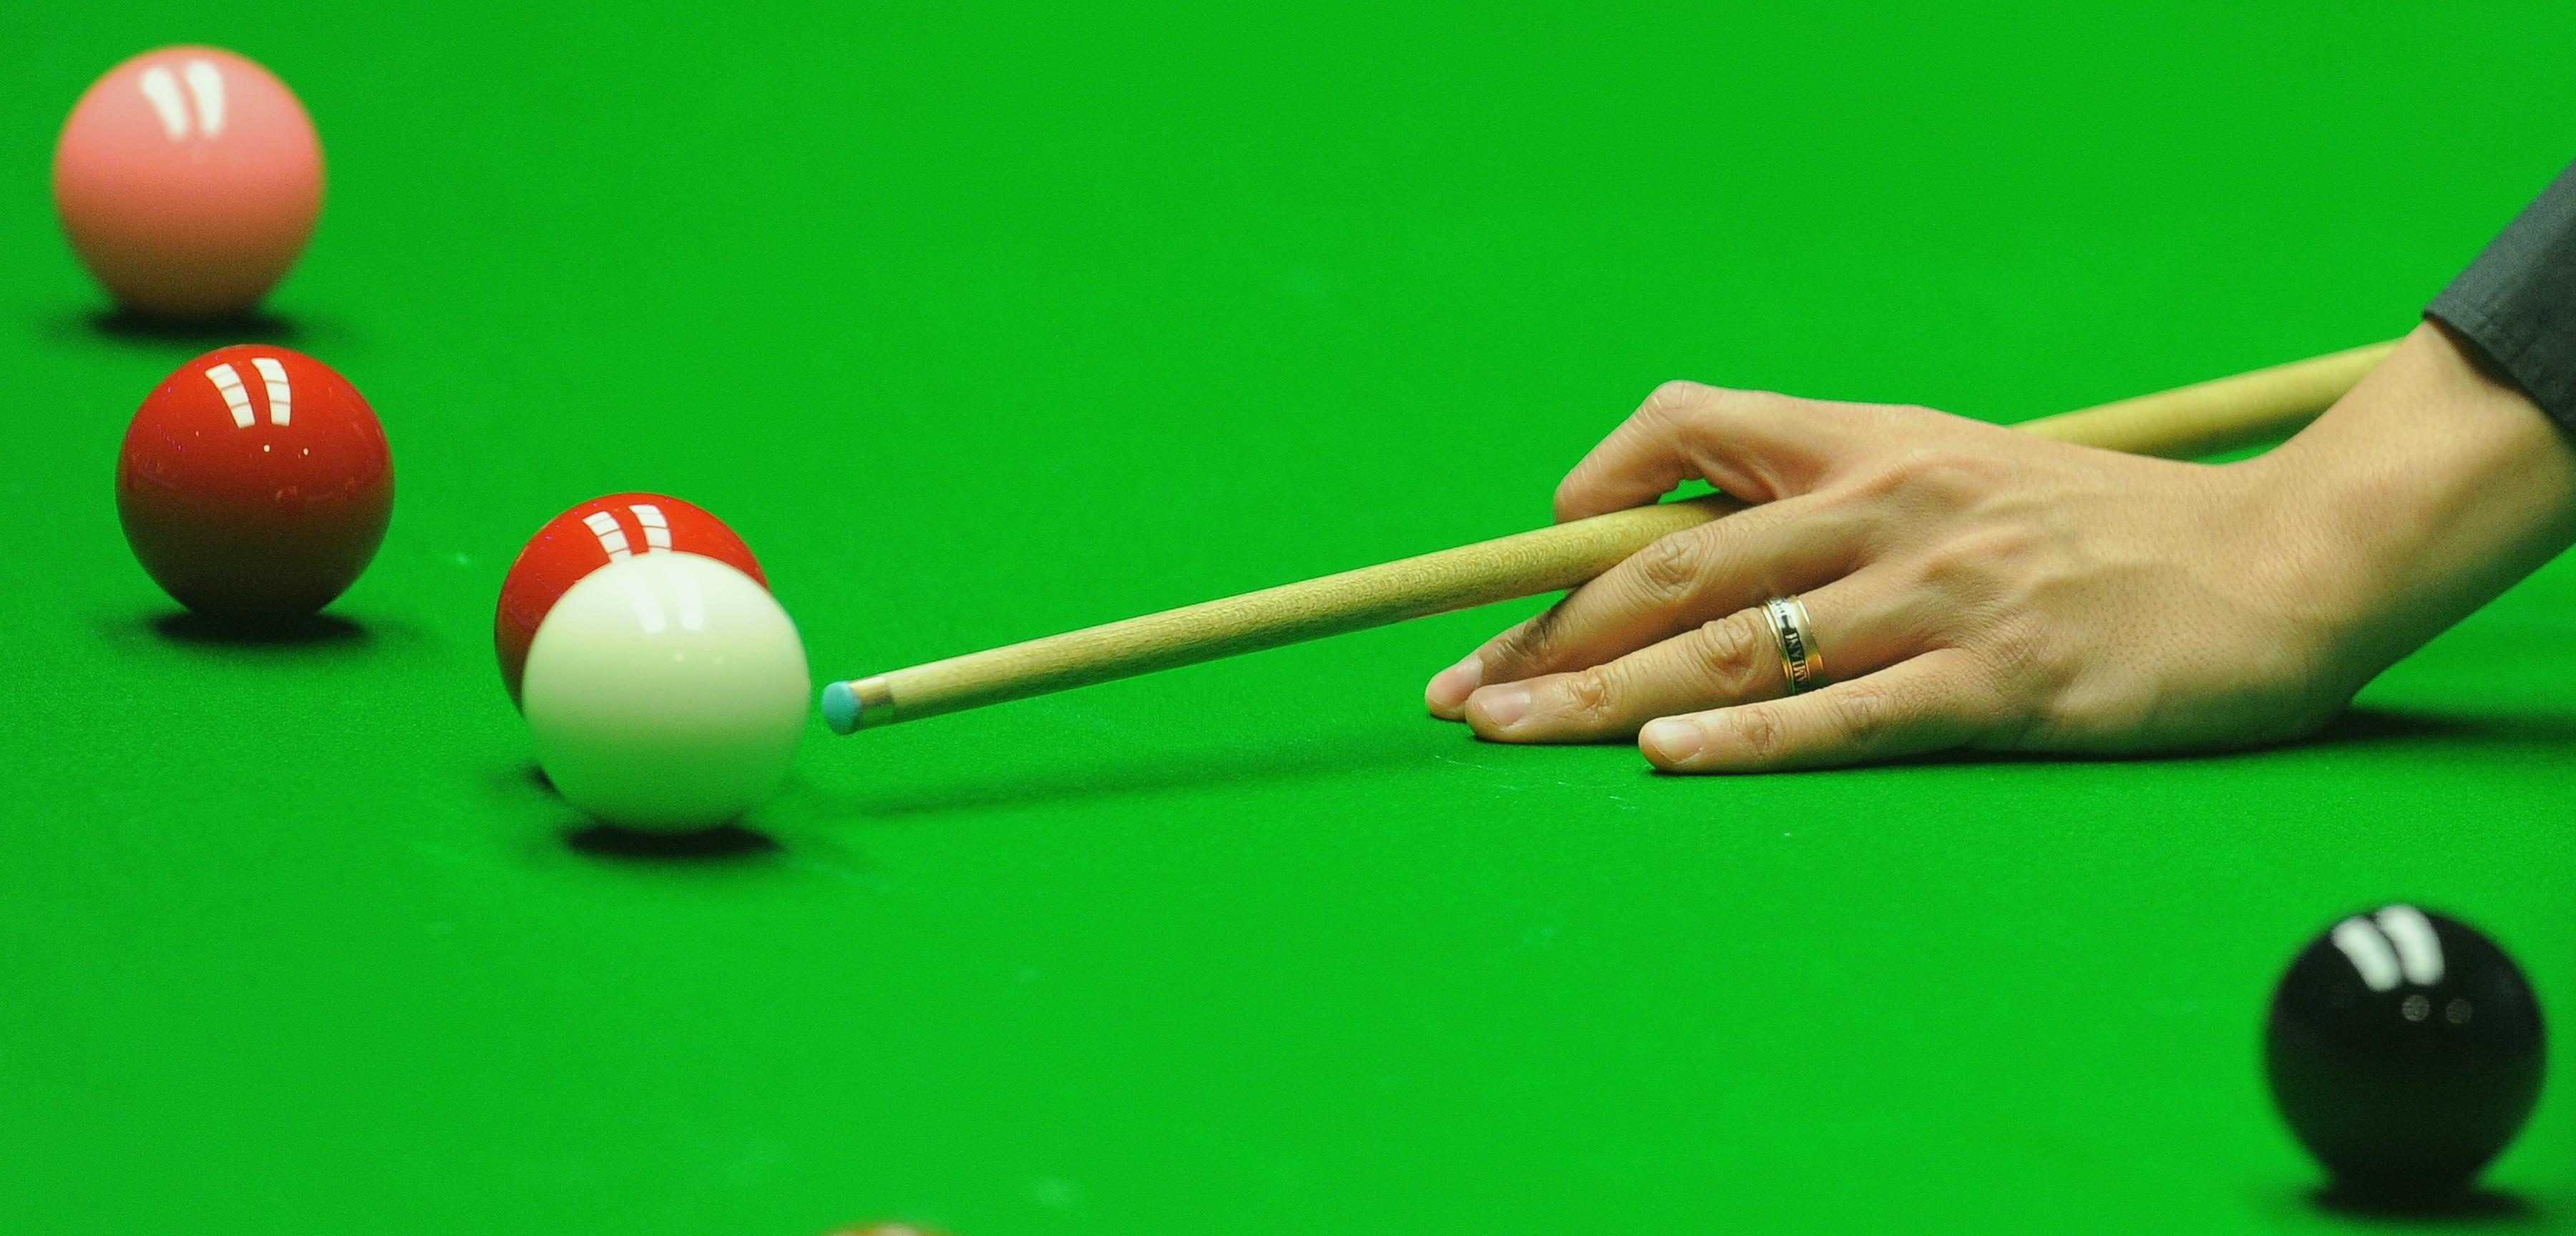 Billiards: Classic snooker game that is played with twenty-two balls - a cue ball, fifteen red balls, and six other balls. 3600x1730 Dual Screen Wallpaper.